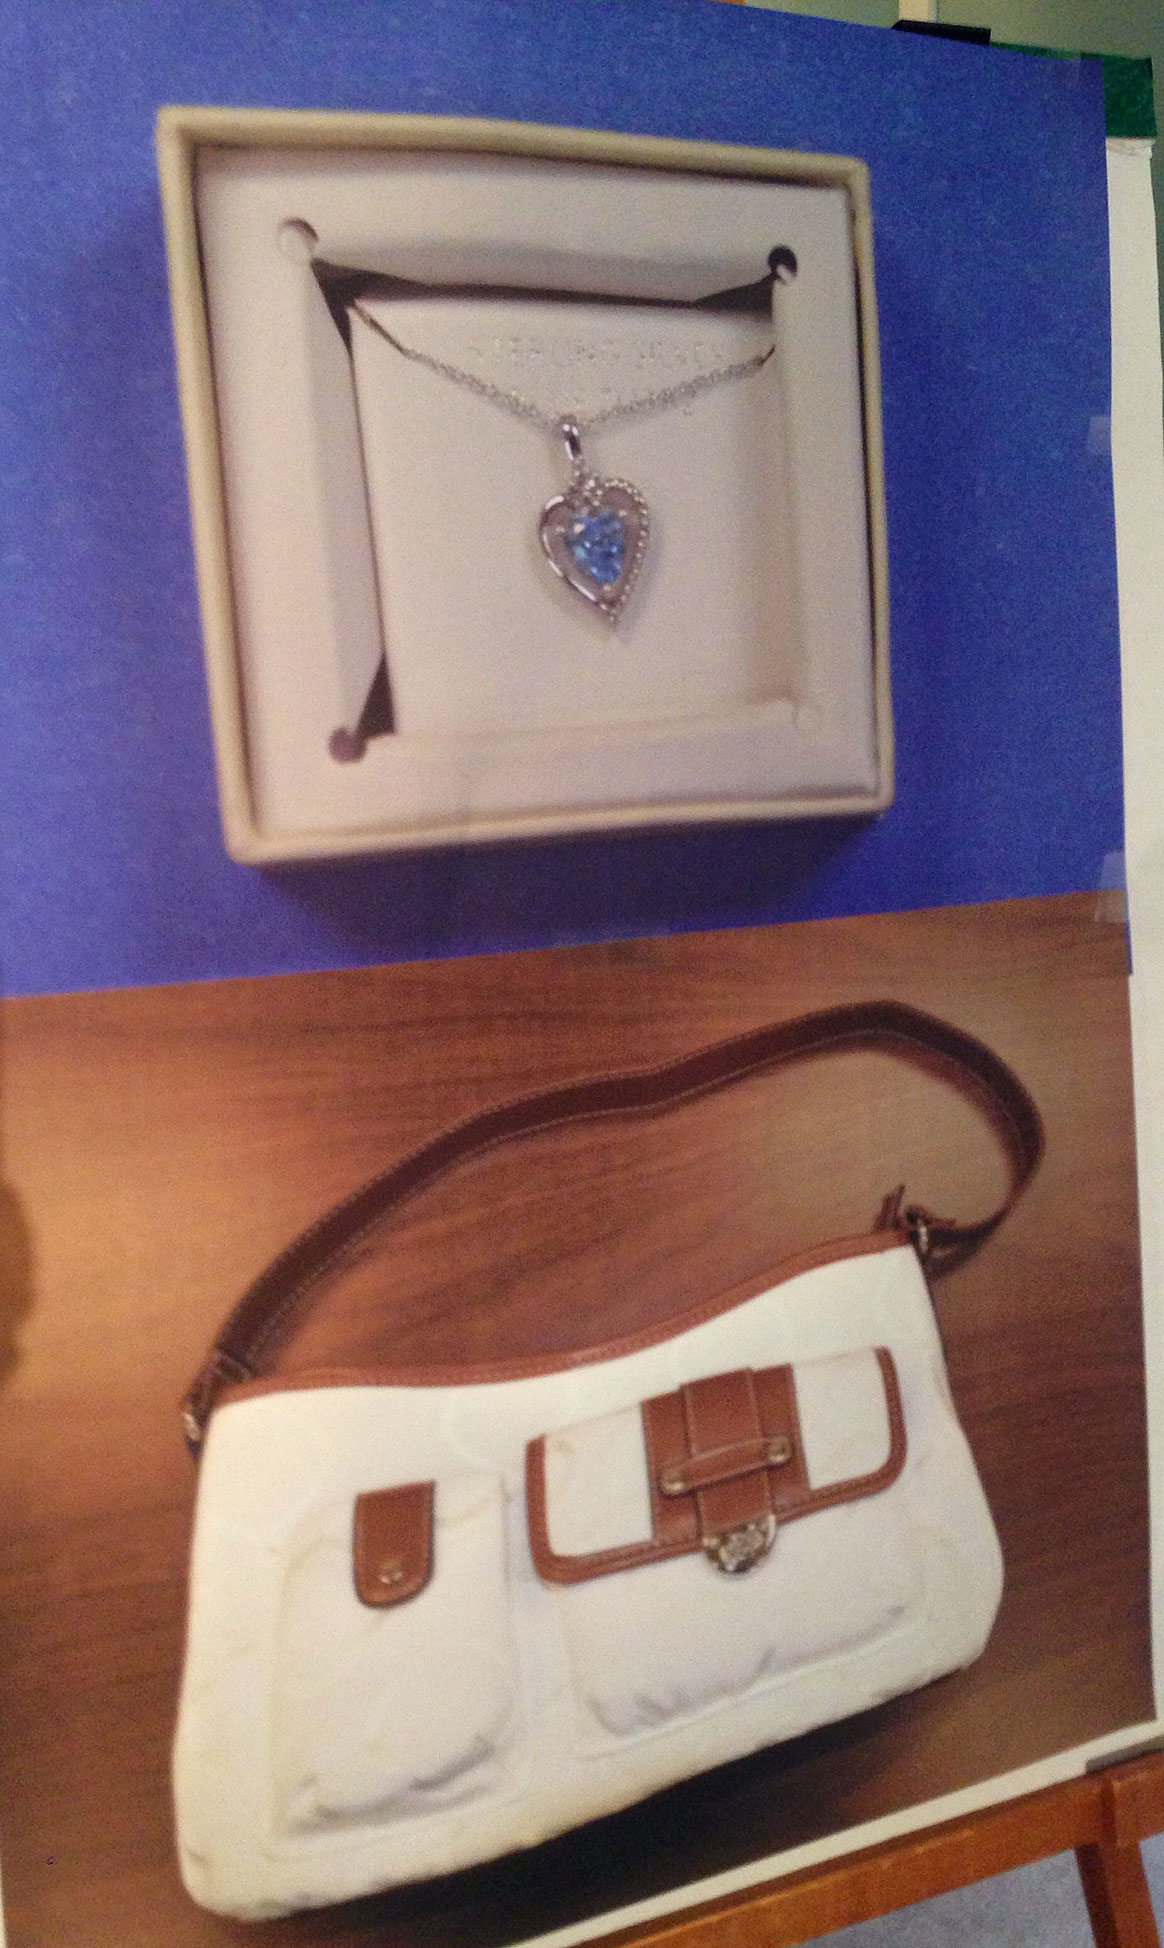 Police believe Abigail Hernandez was carrying the purse and wearing the necklace pictured. (WBZ-TV Photo)